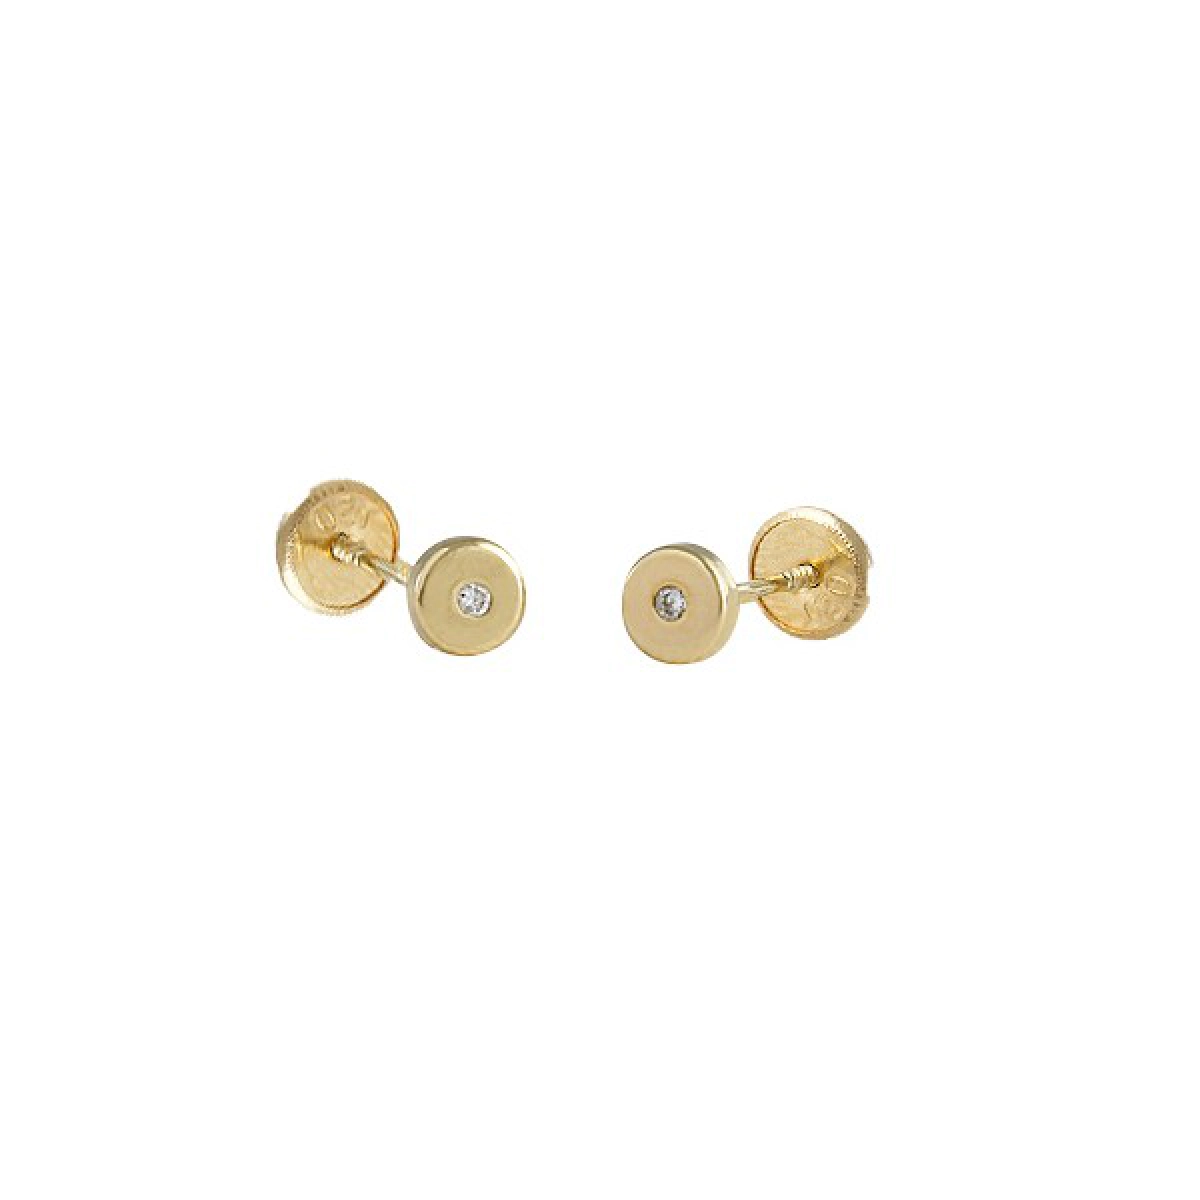 EARRINGS BABY LAW 18 K GOLD YELLOW WITH BRILLIANT 446450 O / Karammelo 446450 o/a